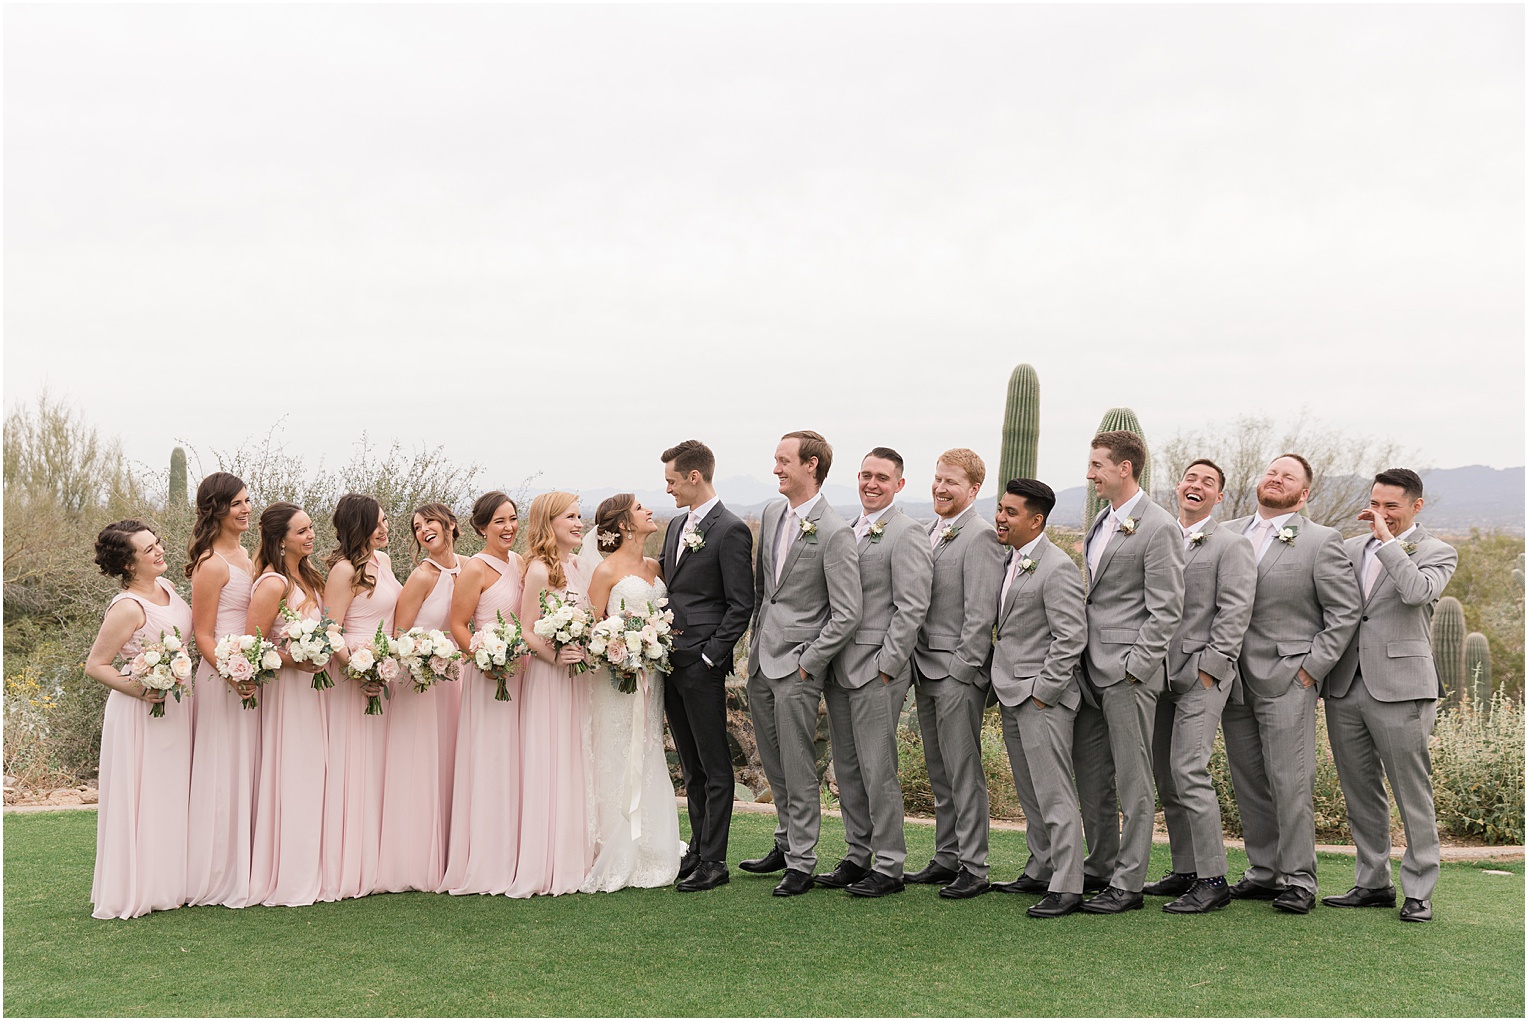 Highlands at Dove Mountain Wedding Grace + Danny Bridal Party photos with bridesmaids in blush dresses and groomsmen in light grey